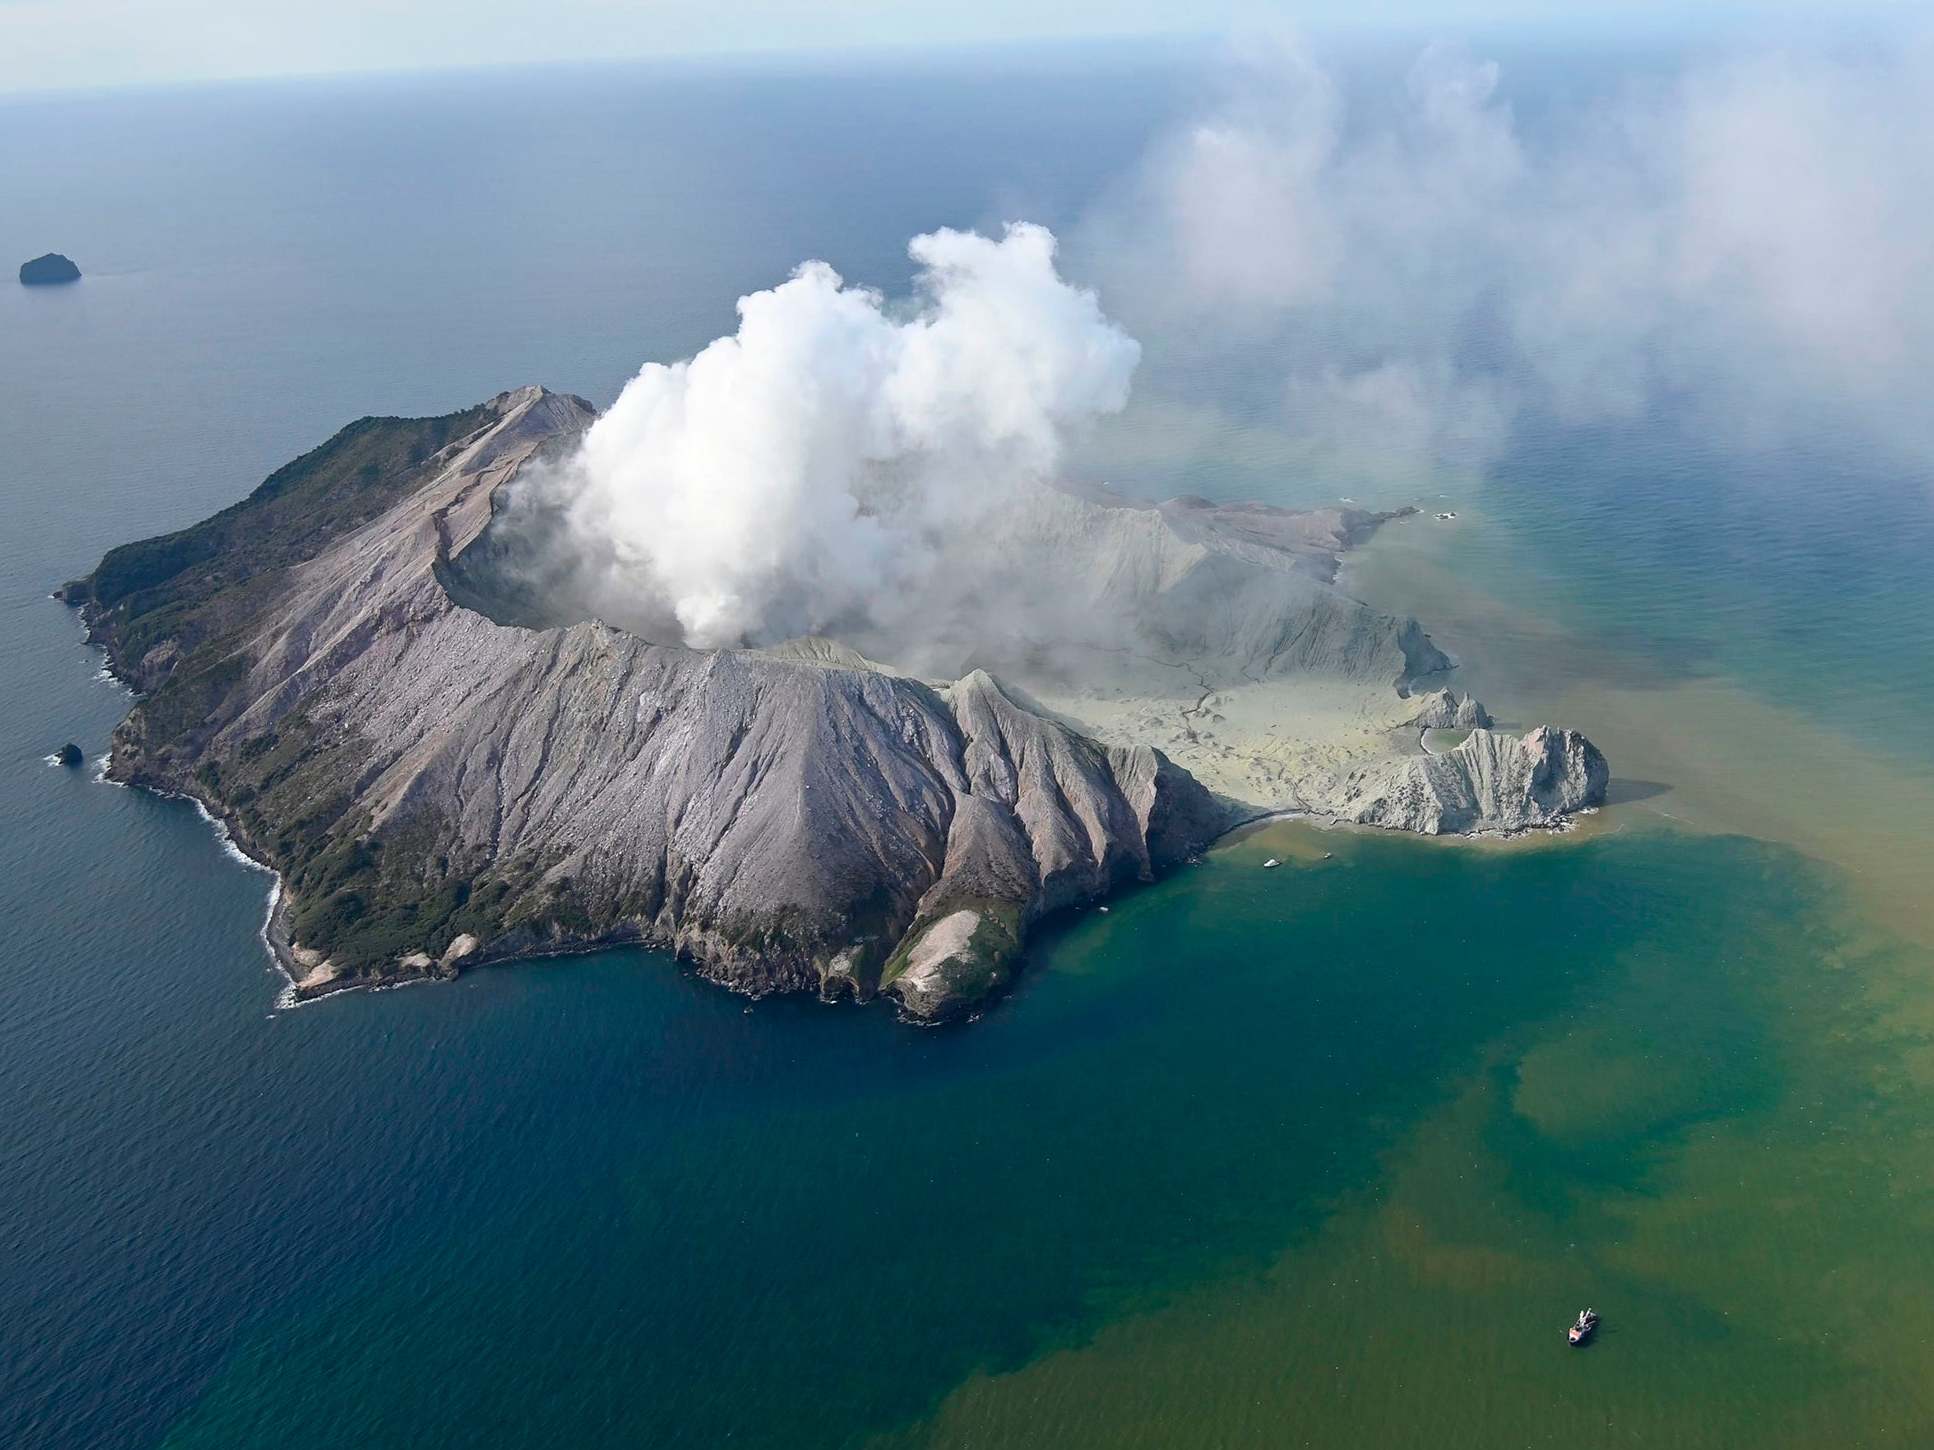  New  Zealand  volcano  Two Britons among those injured after 